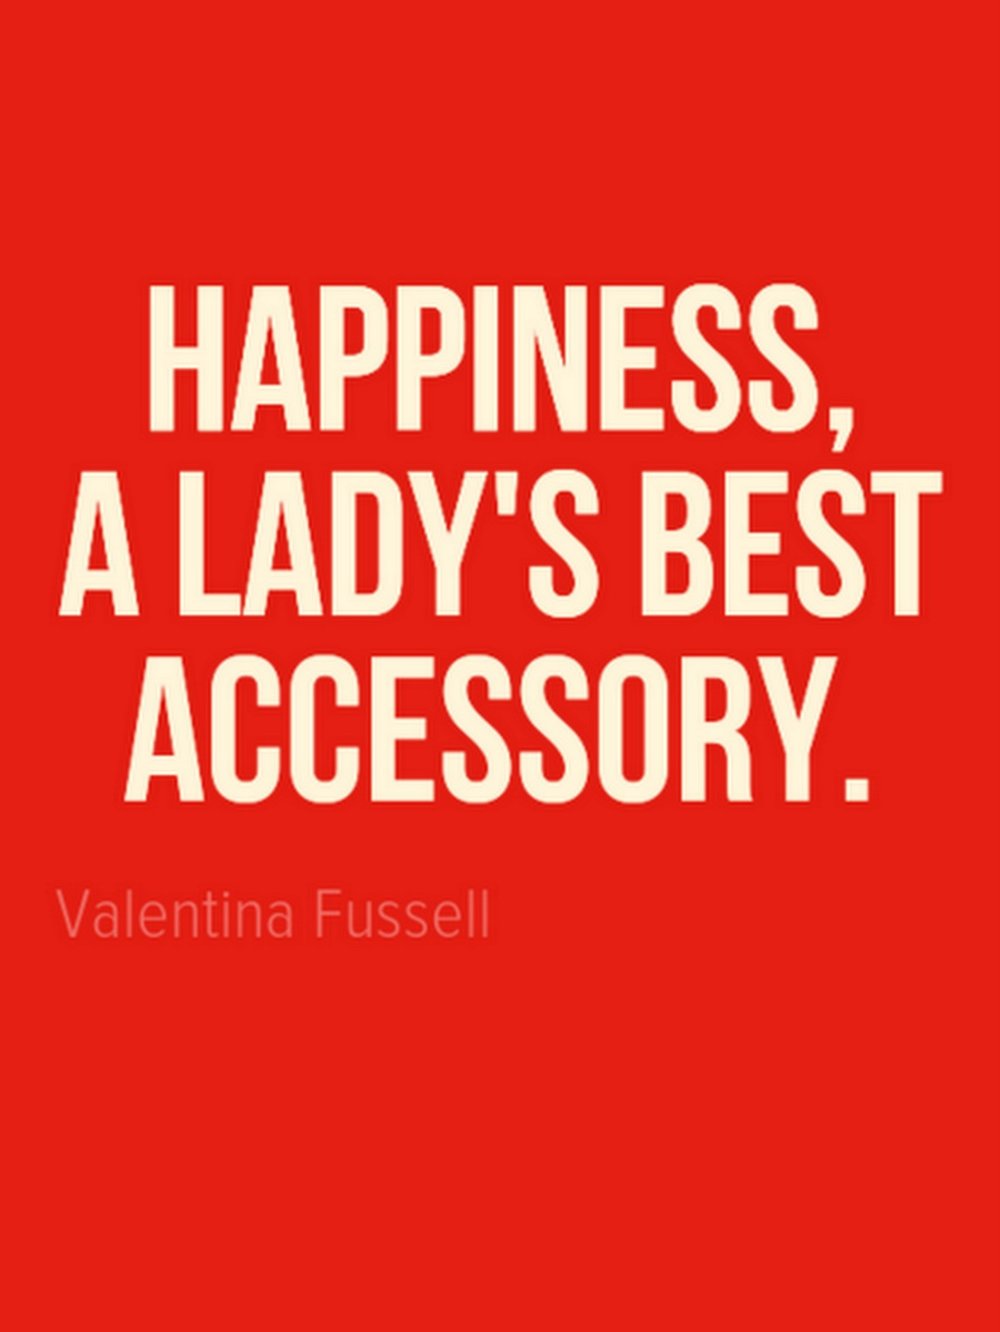 Happiness Best Accessory Valentina Fussell